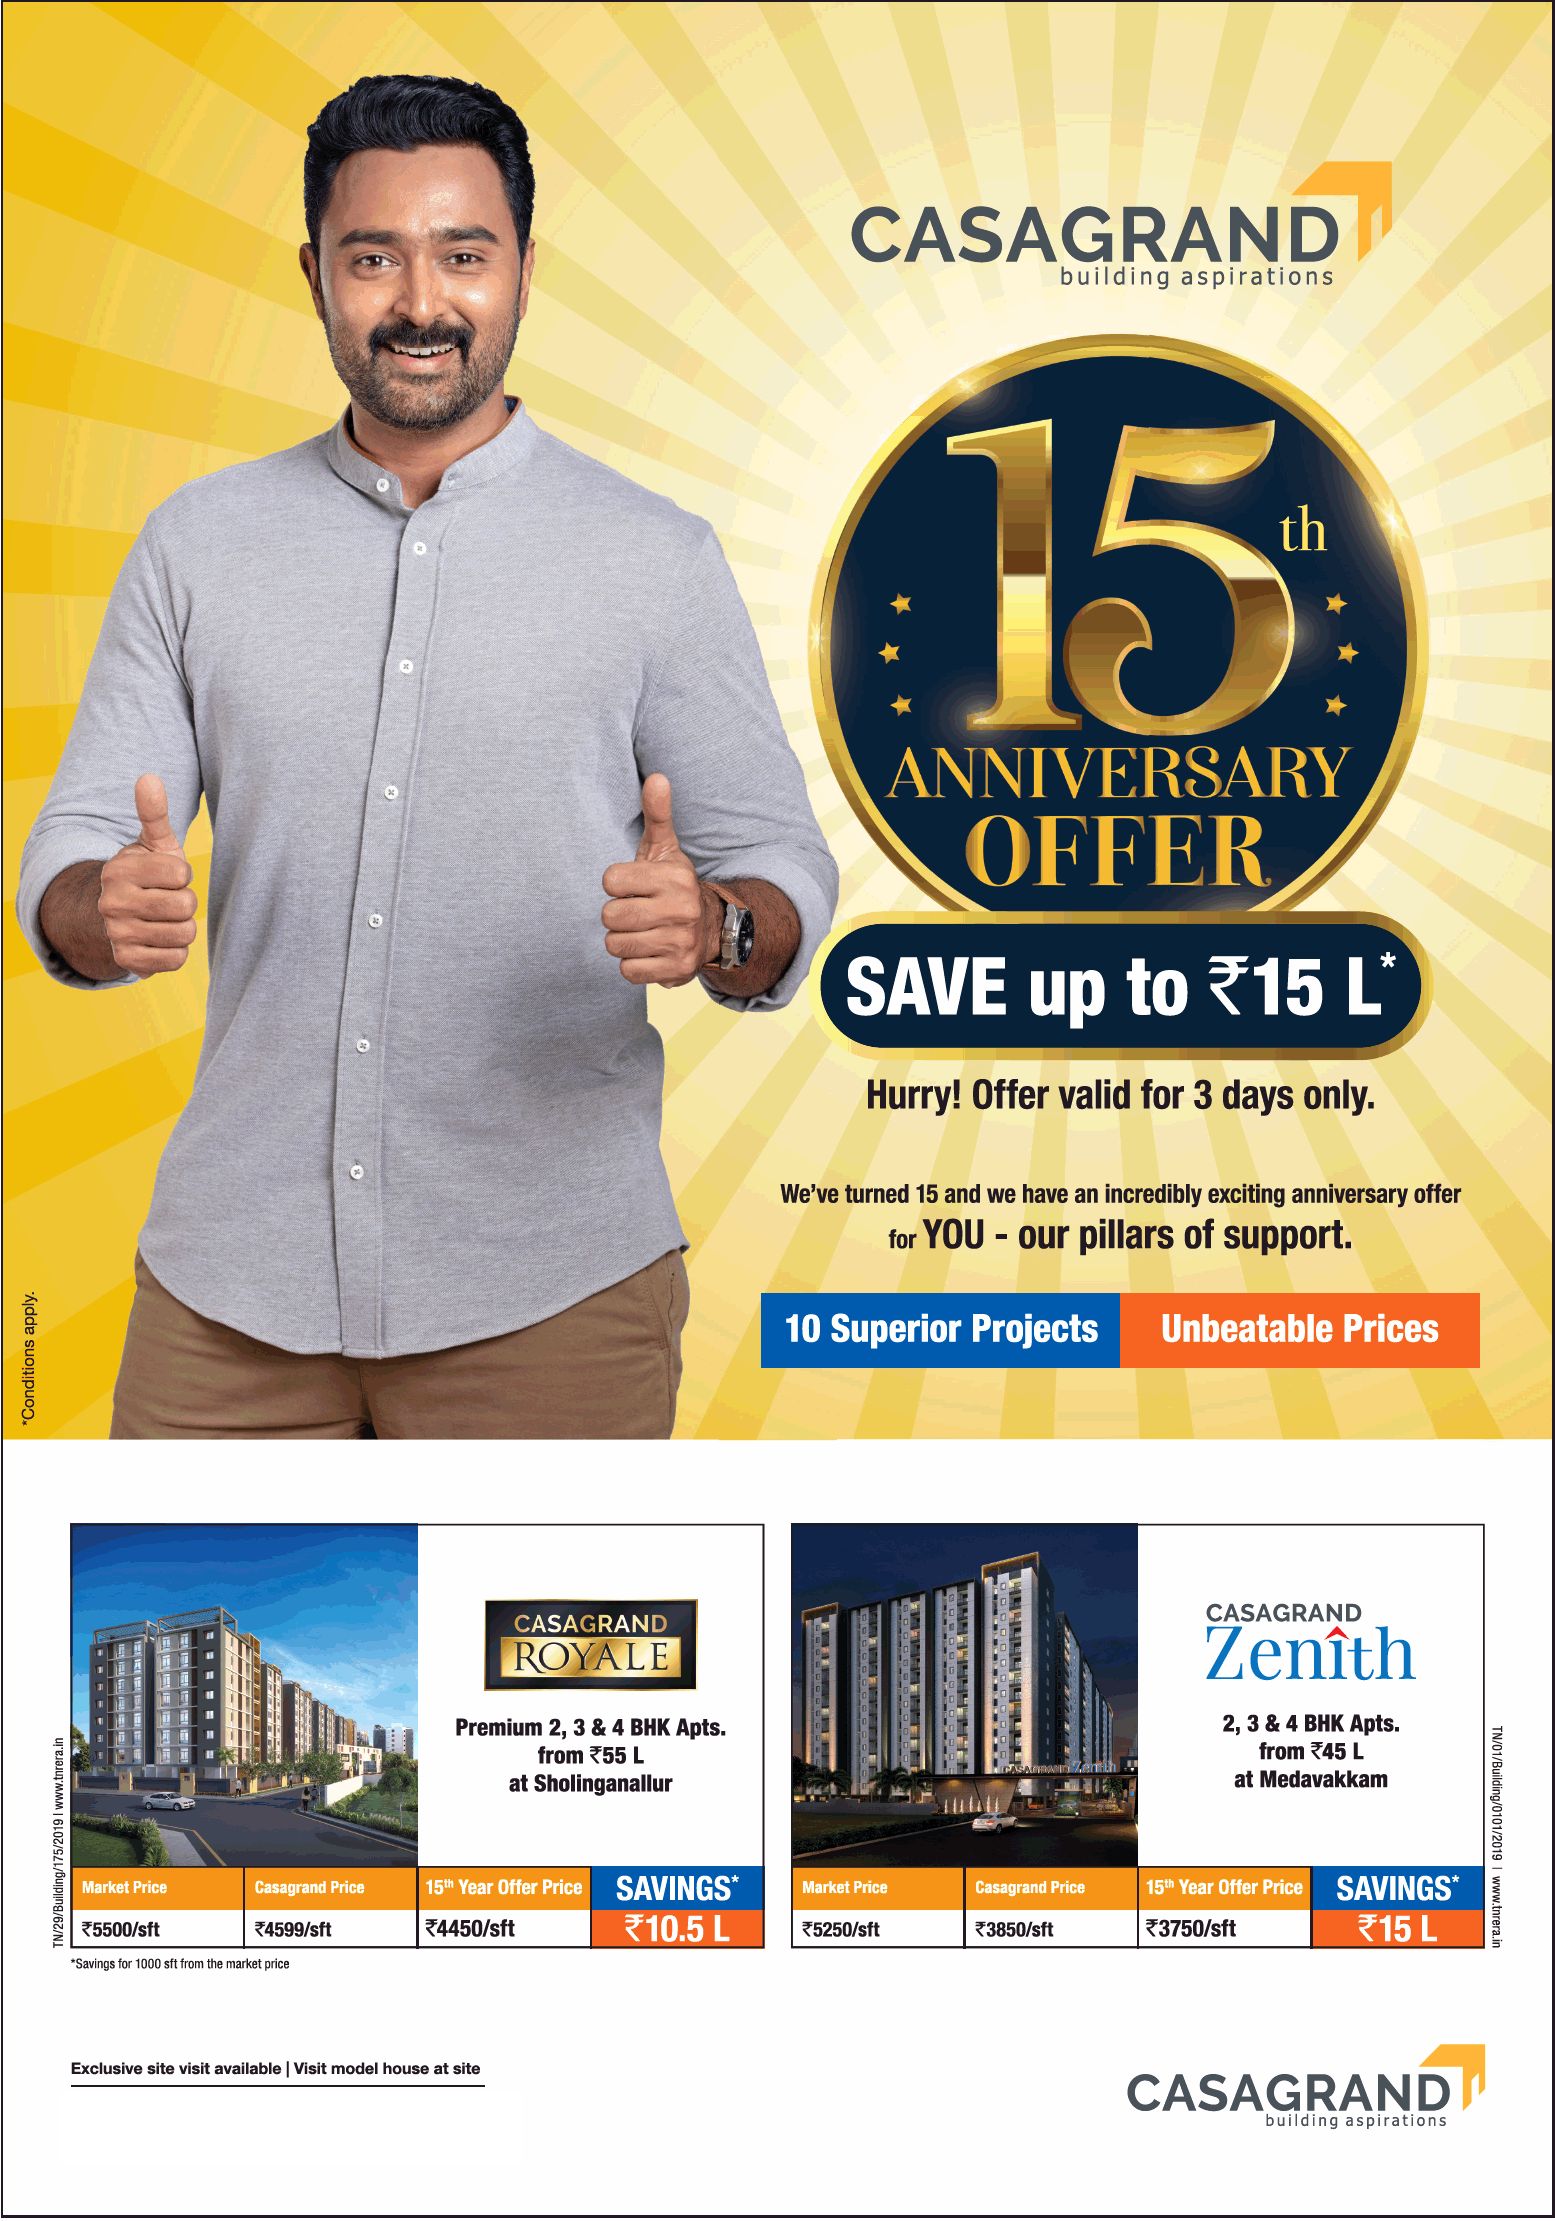 15th anniversary offer (save up to Rs15 Lac) at Casagrand in Chennai